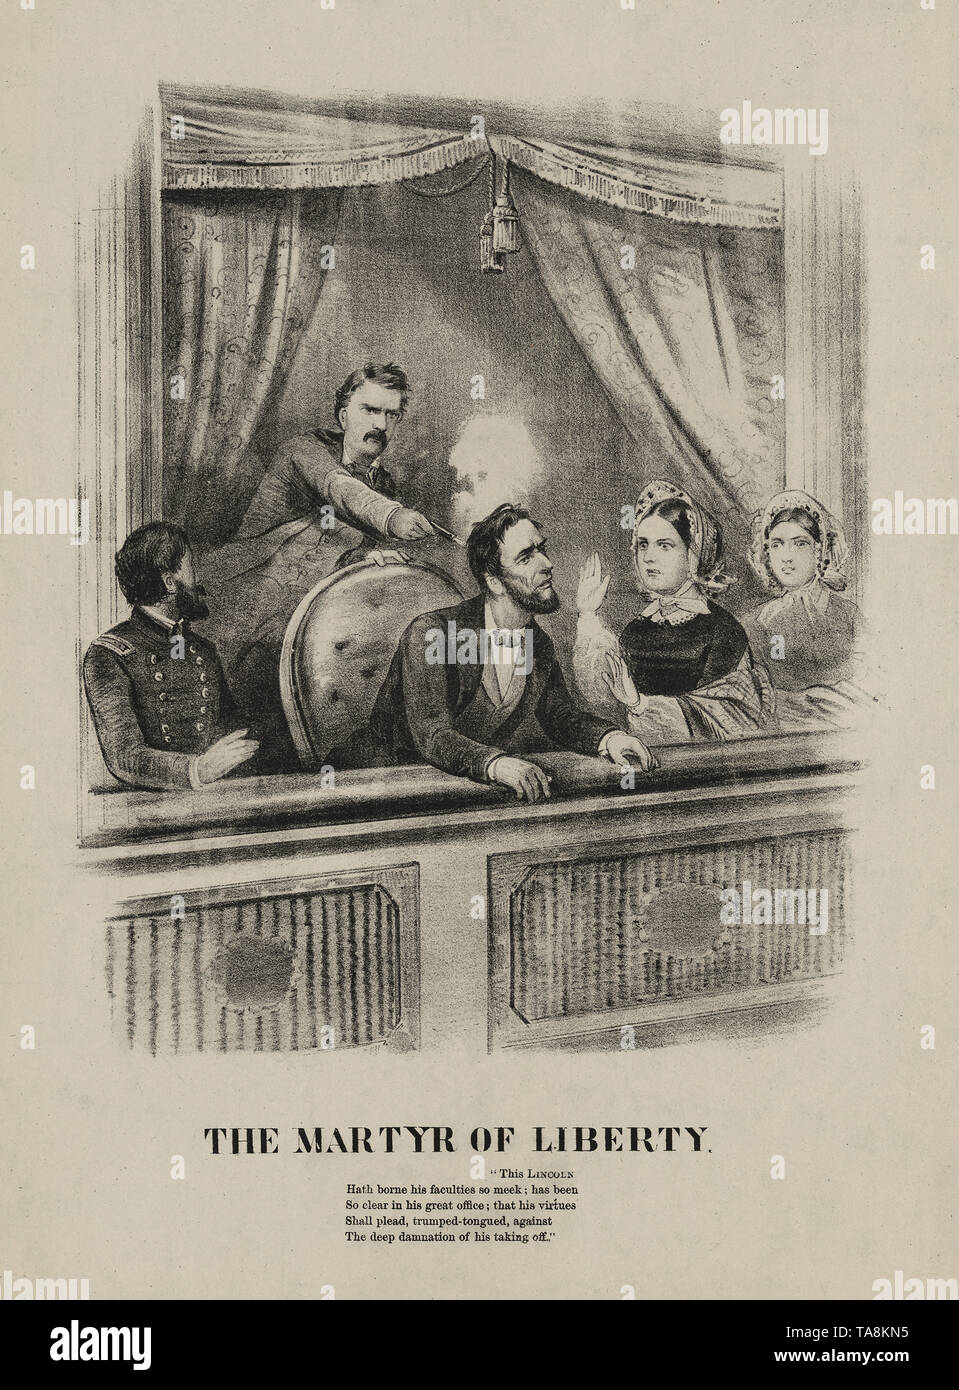 The Martyr of Liberty, Assassination of President Lincoln, Ford's Theatre, Washington, April 14, 1865 Stock Photo